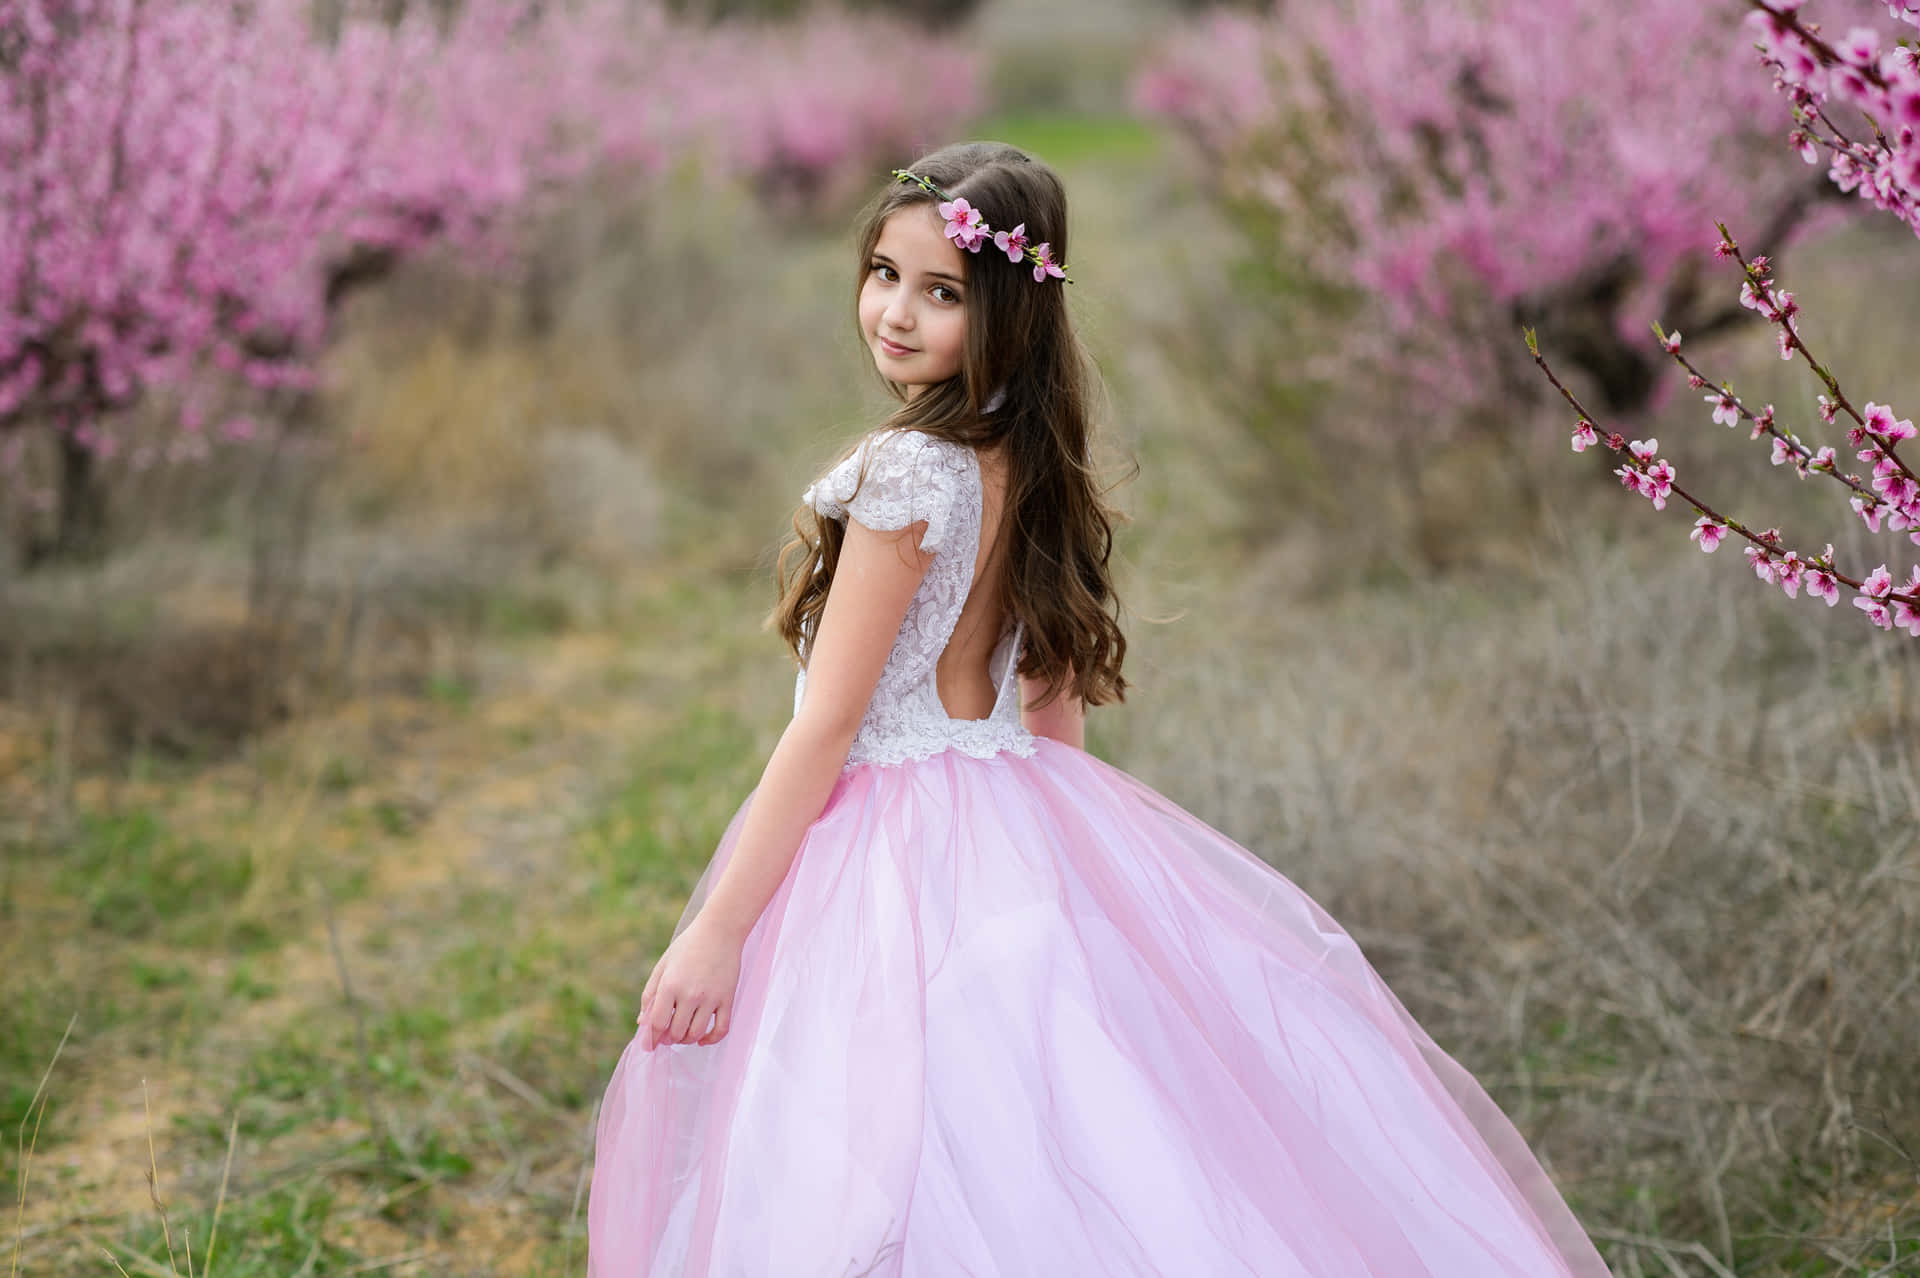 A Girl In A Pink Tulle Dress Is Standing In A Field Of Blossoms Wallpaper